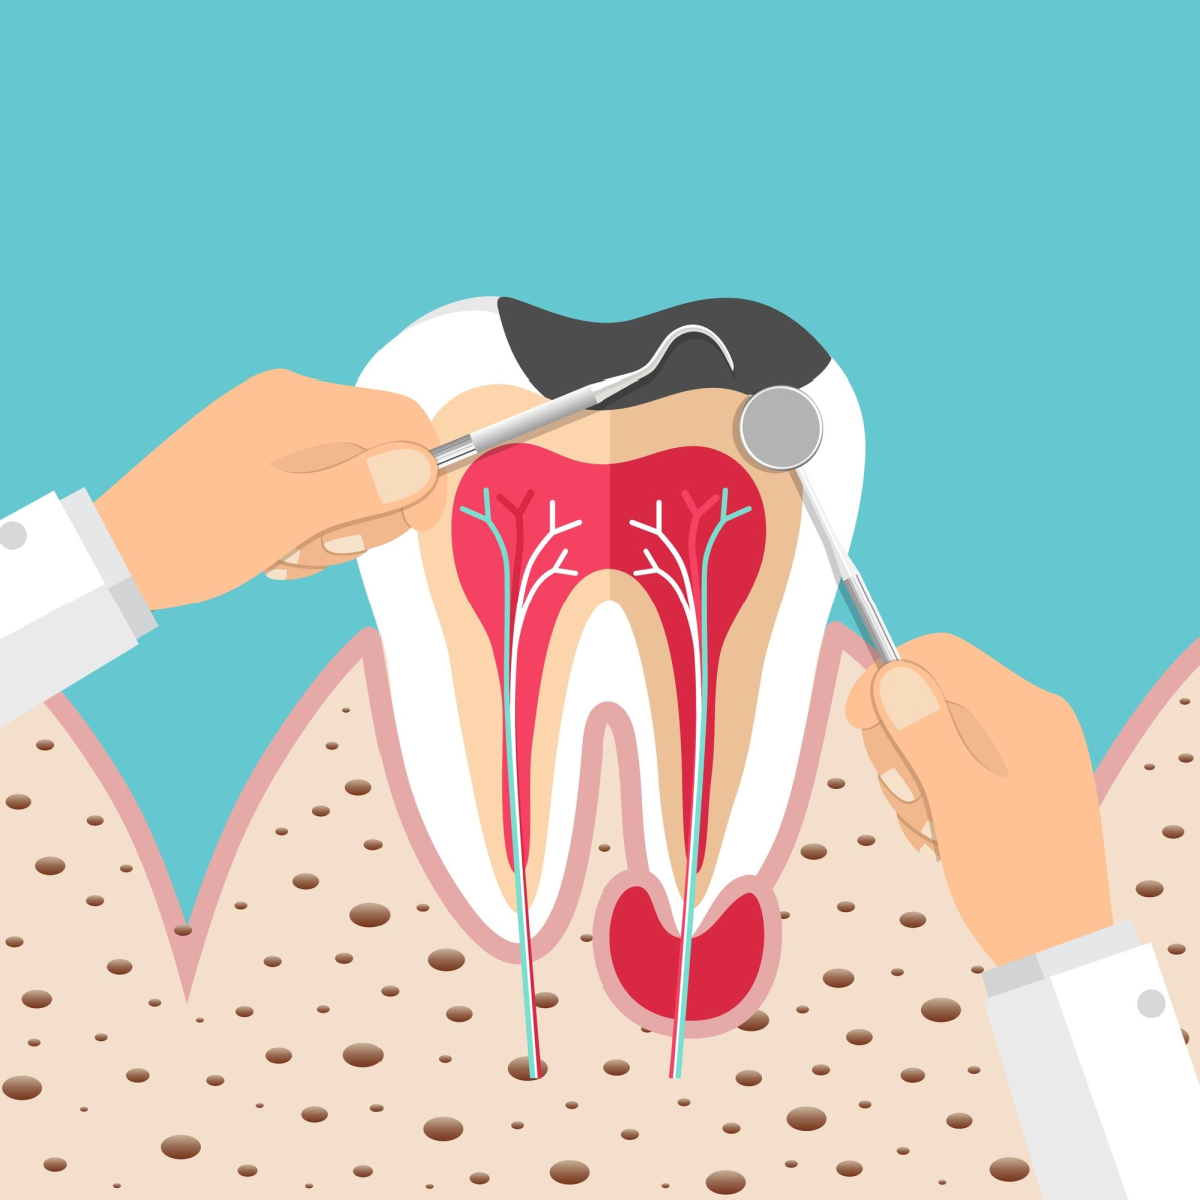 Dentist holding instruments and examining patient teeth. Teeth examination dentistry concept.